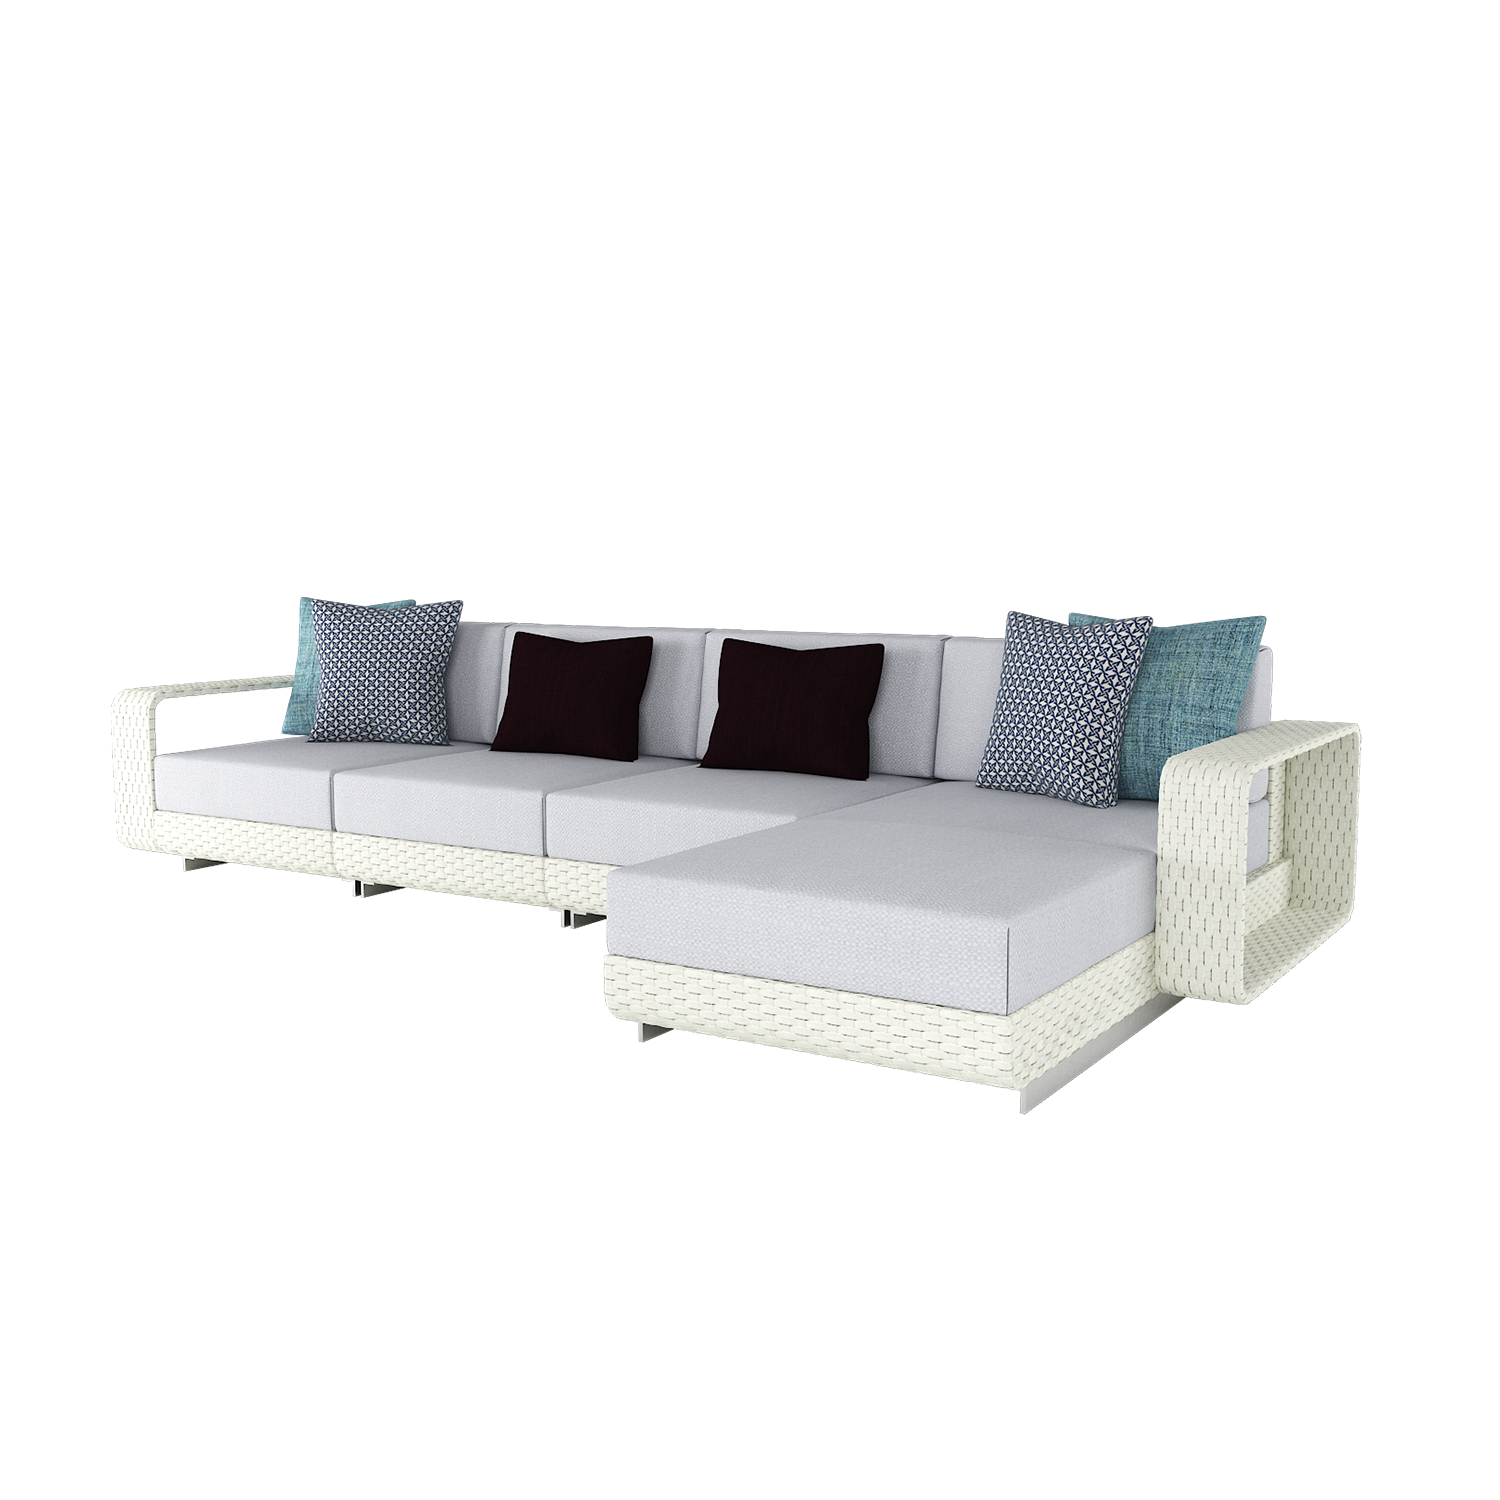 Hamptons Outdoor 3 Cushion Sofa with Chaise Lounge | Roberti | outdoor sofas | hamptons-outdoor-3-cushion-sofa-with-chaise-lounge